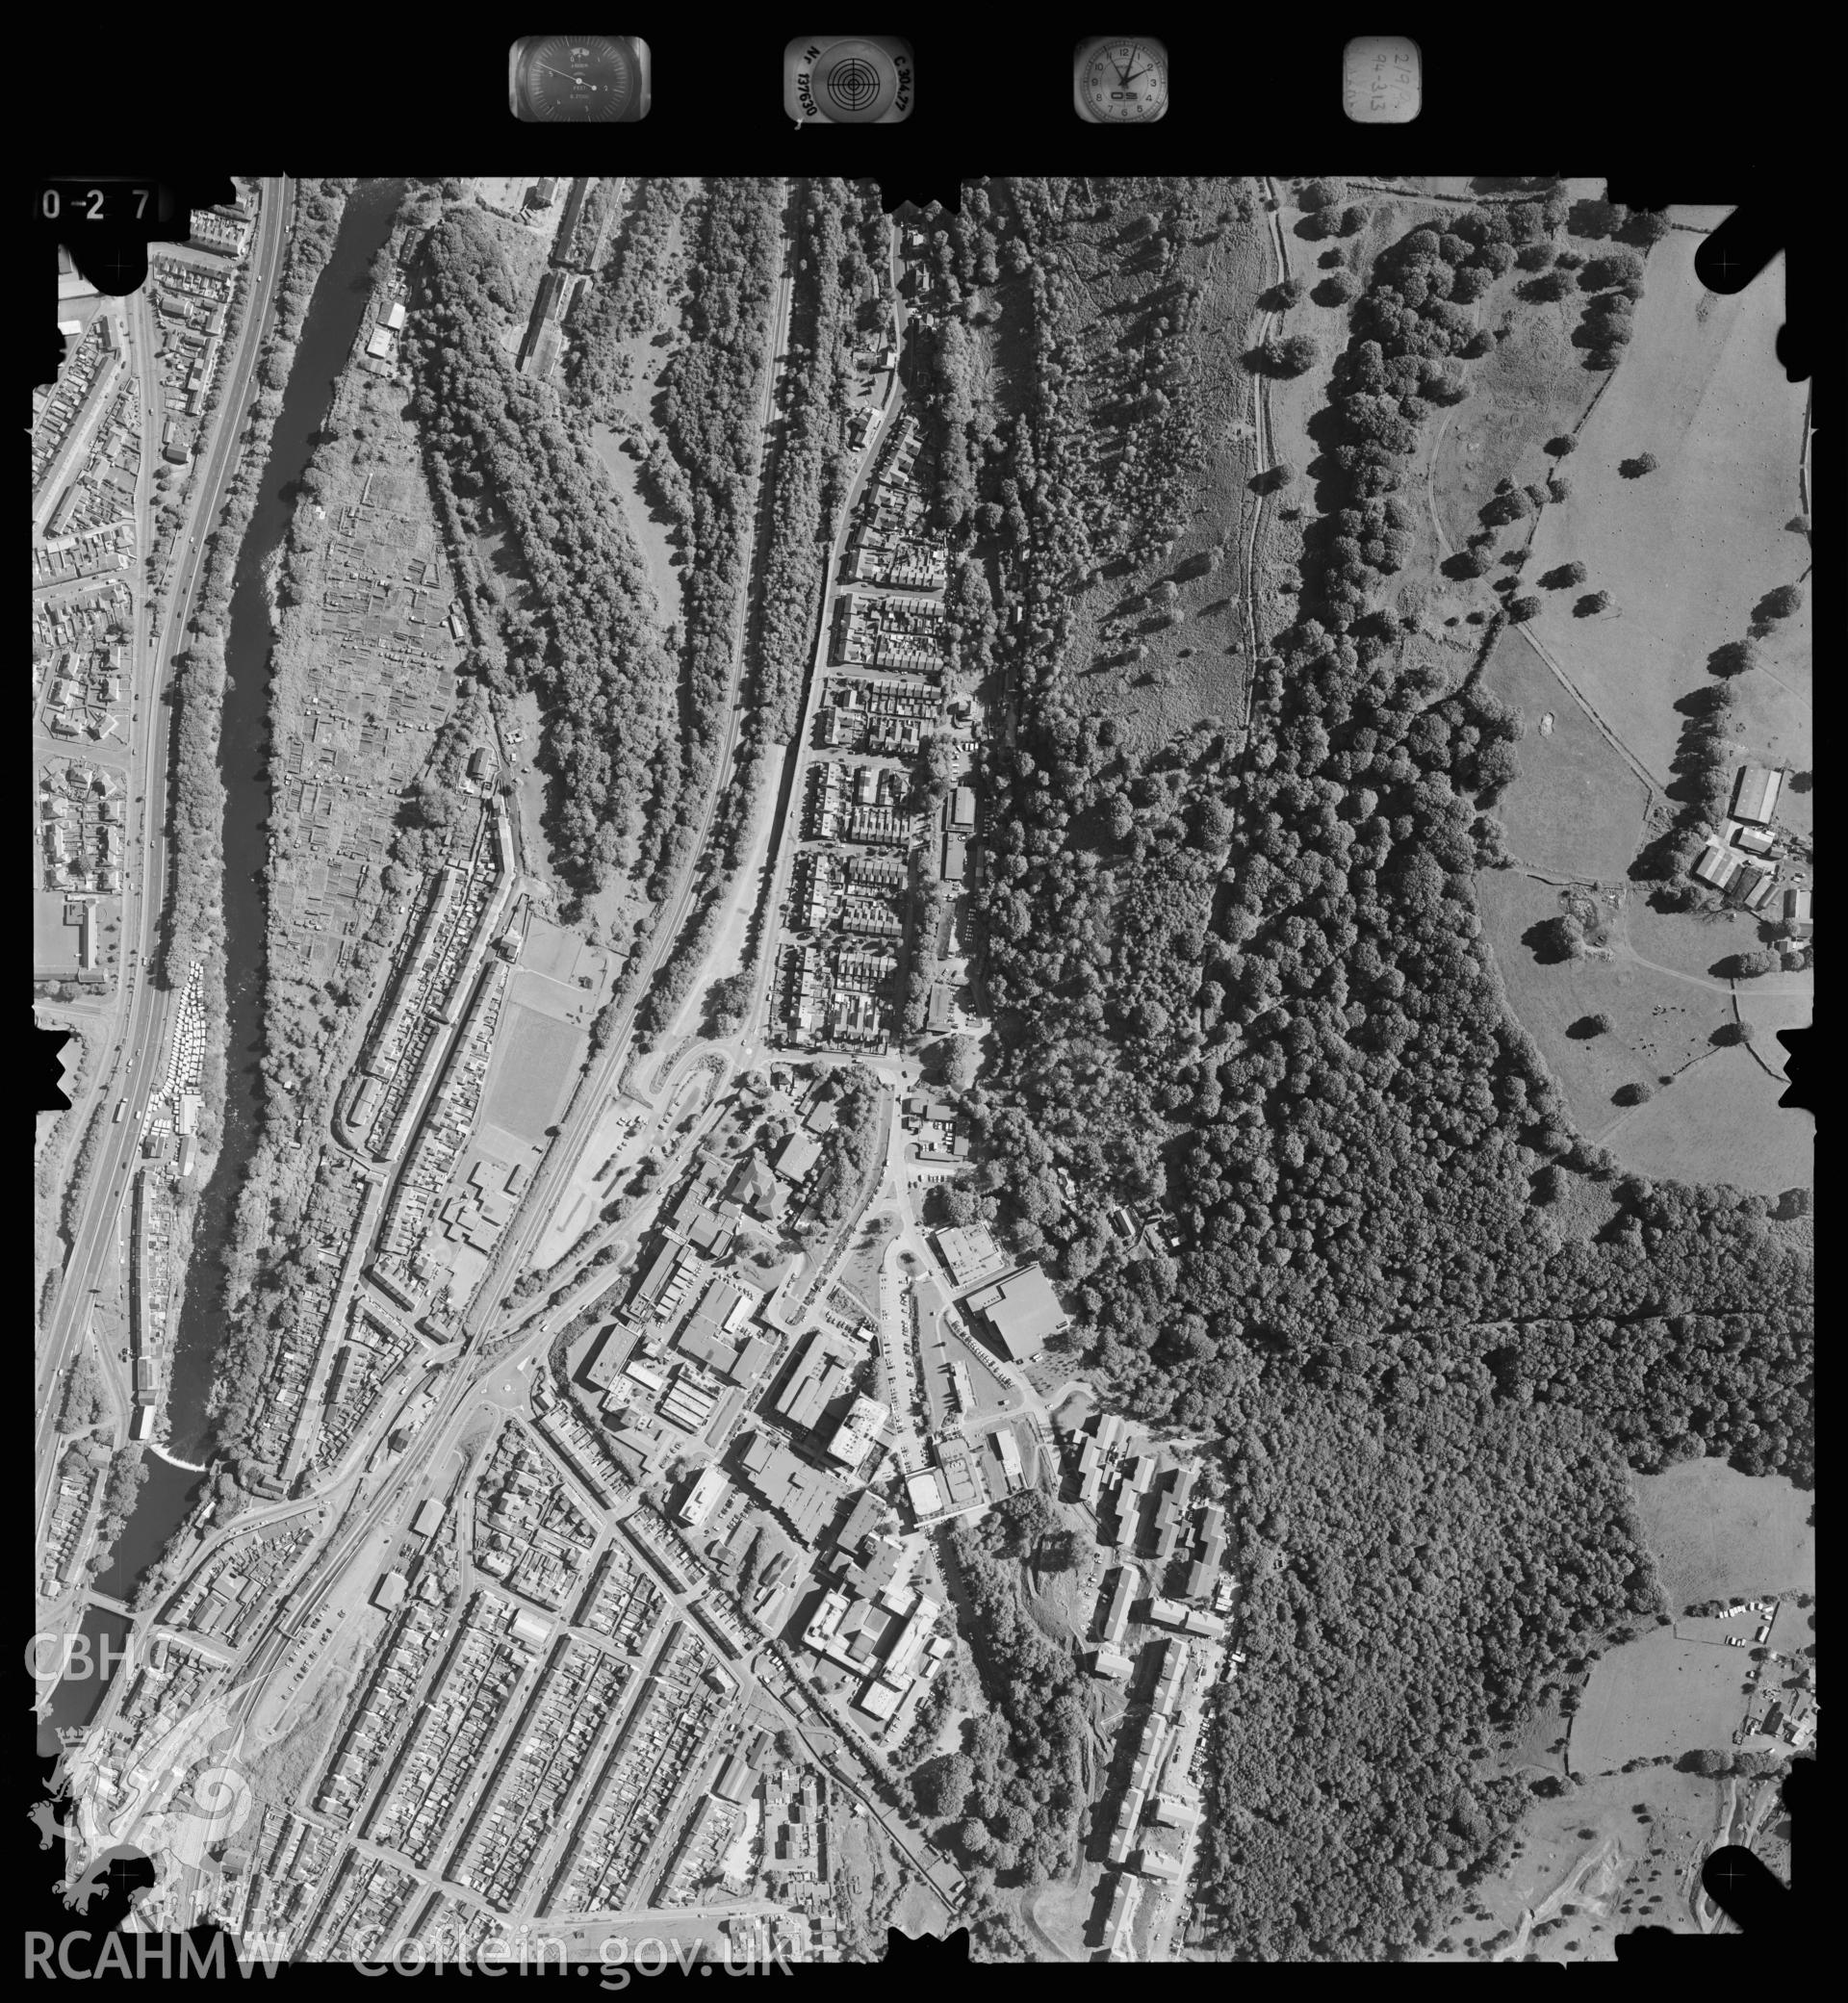 Digitized copy of an aerial photograph showing the Treforest area, taken by Ordnance Survey, 1994.